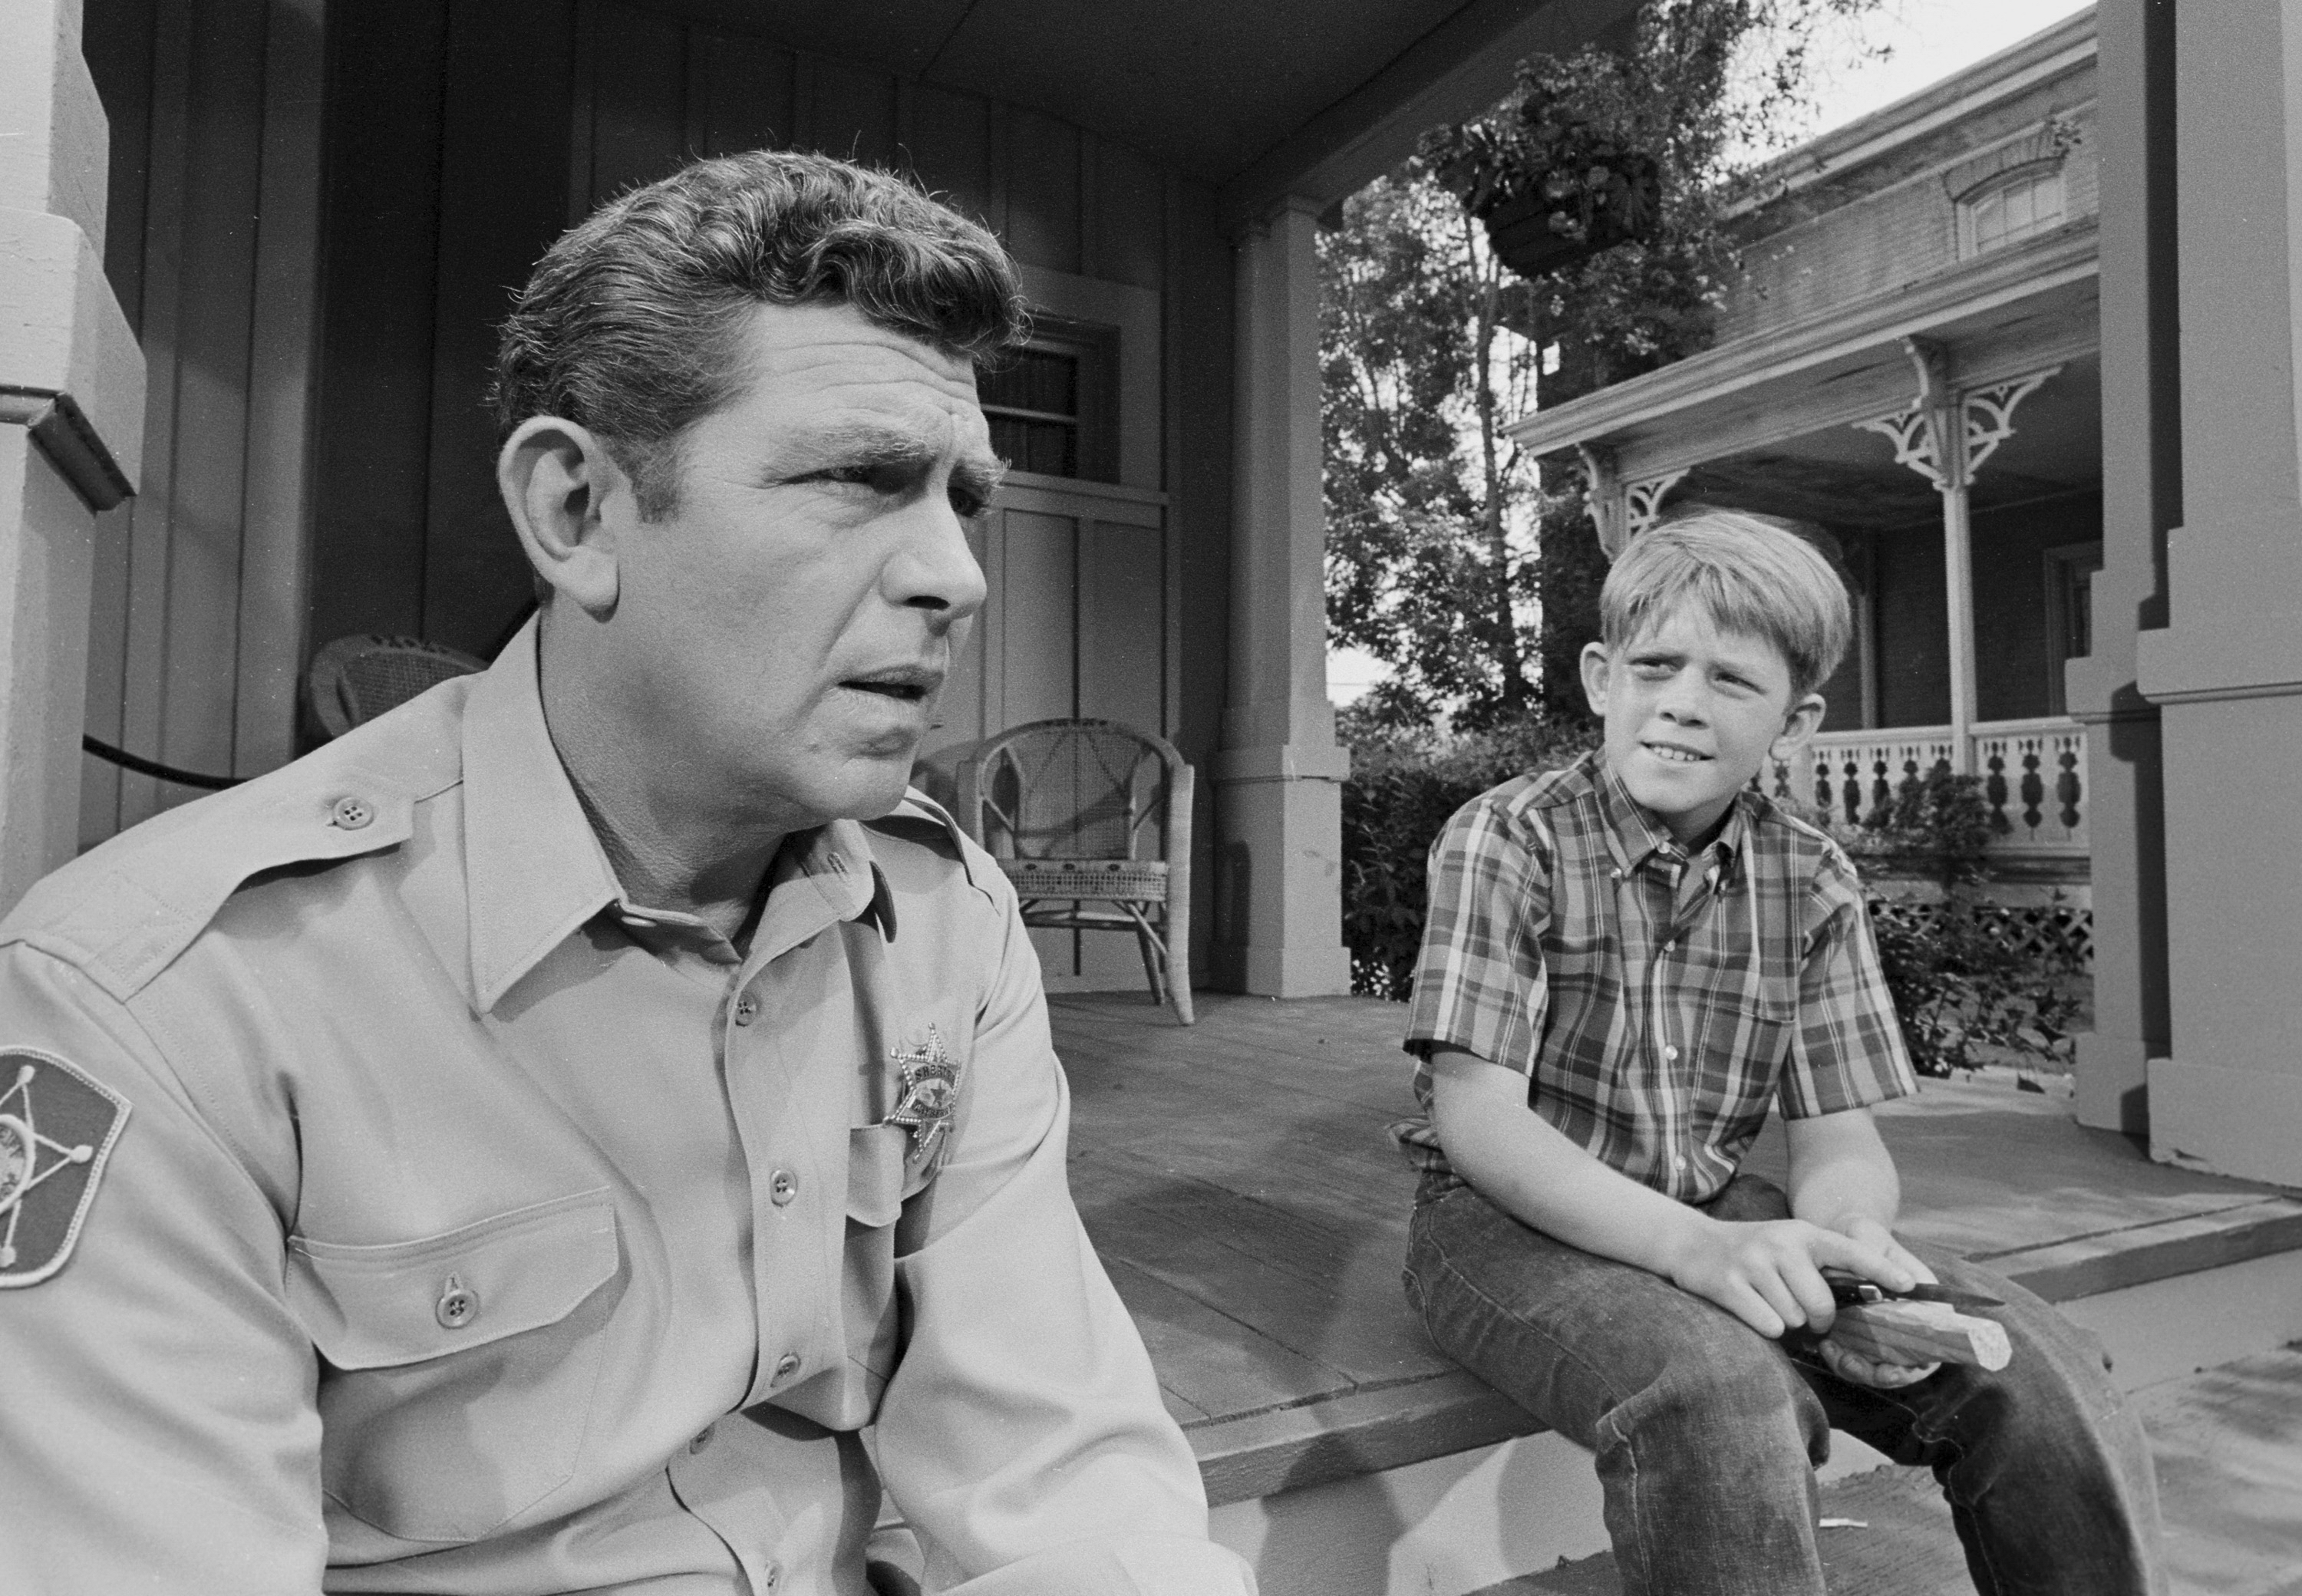 LOS ANGELES - JUNE 20: THE ANDY GRIFFITH SHOW ep: "Opie's Girlfriend". Andy Griffith and Opie (Ron Howard).